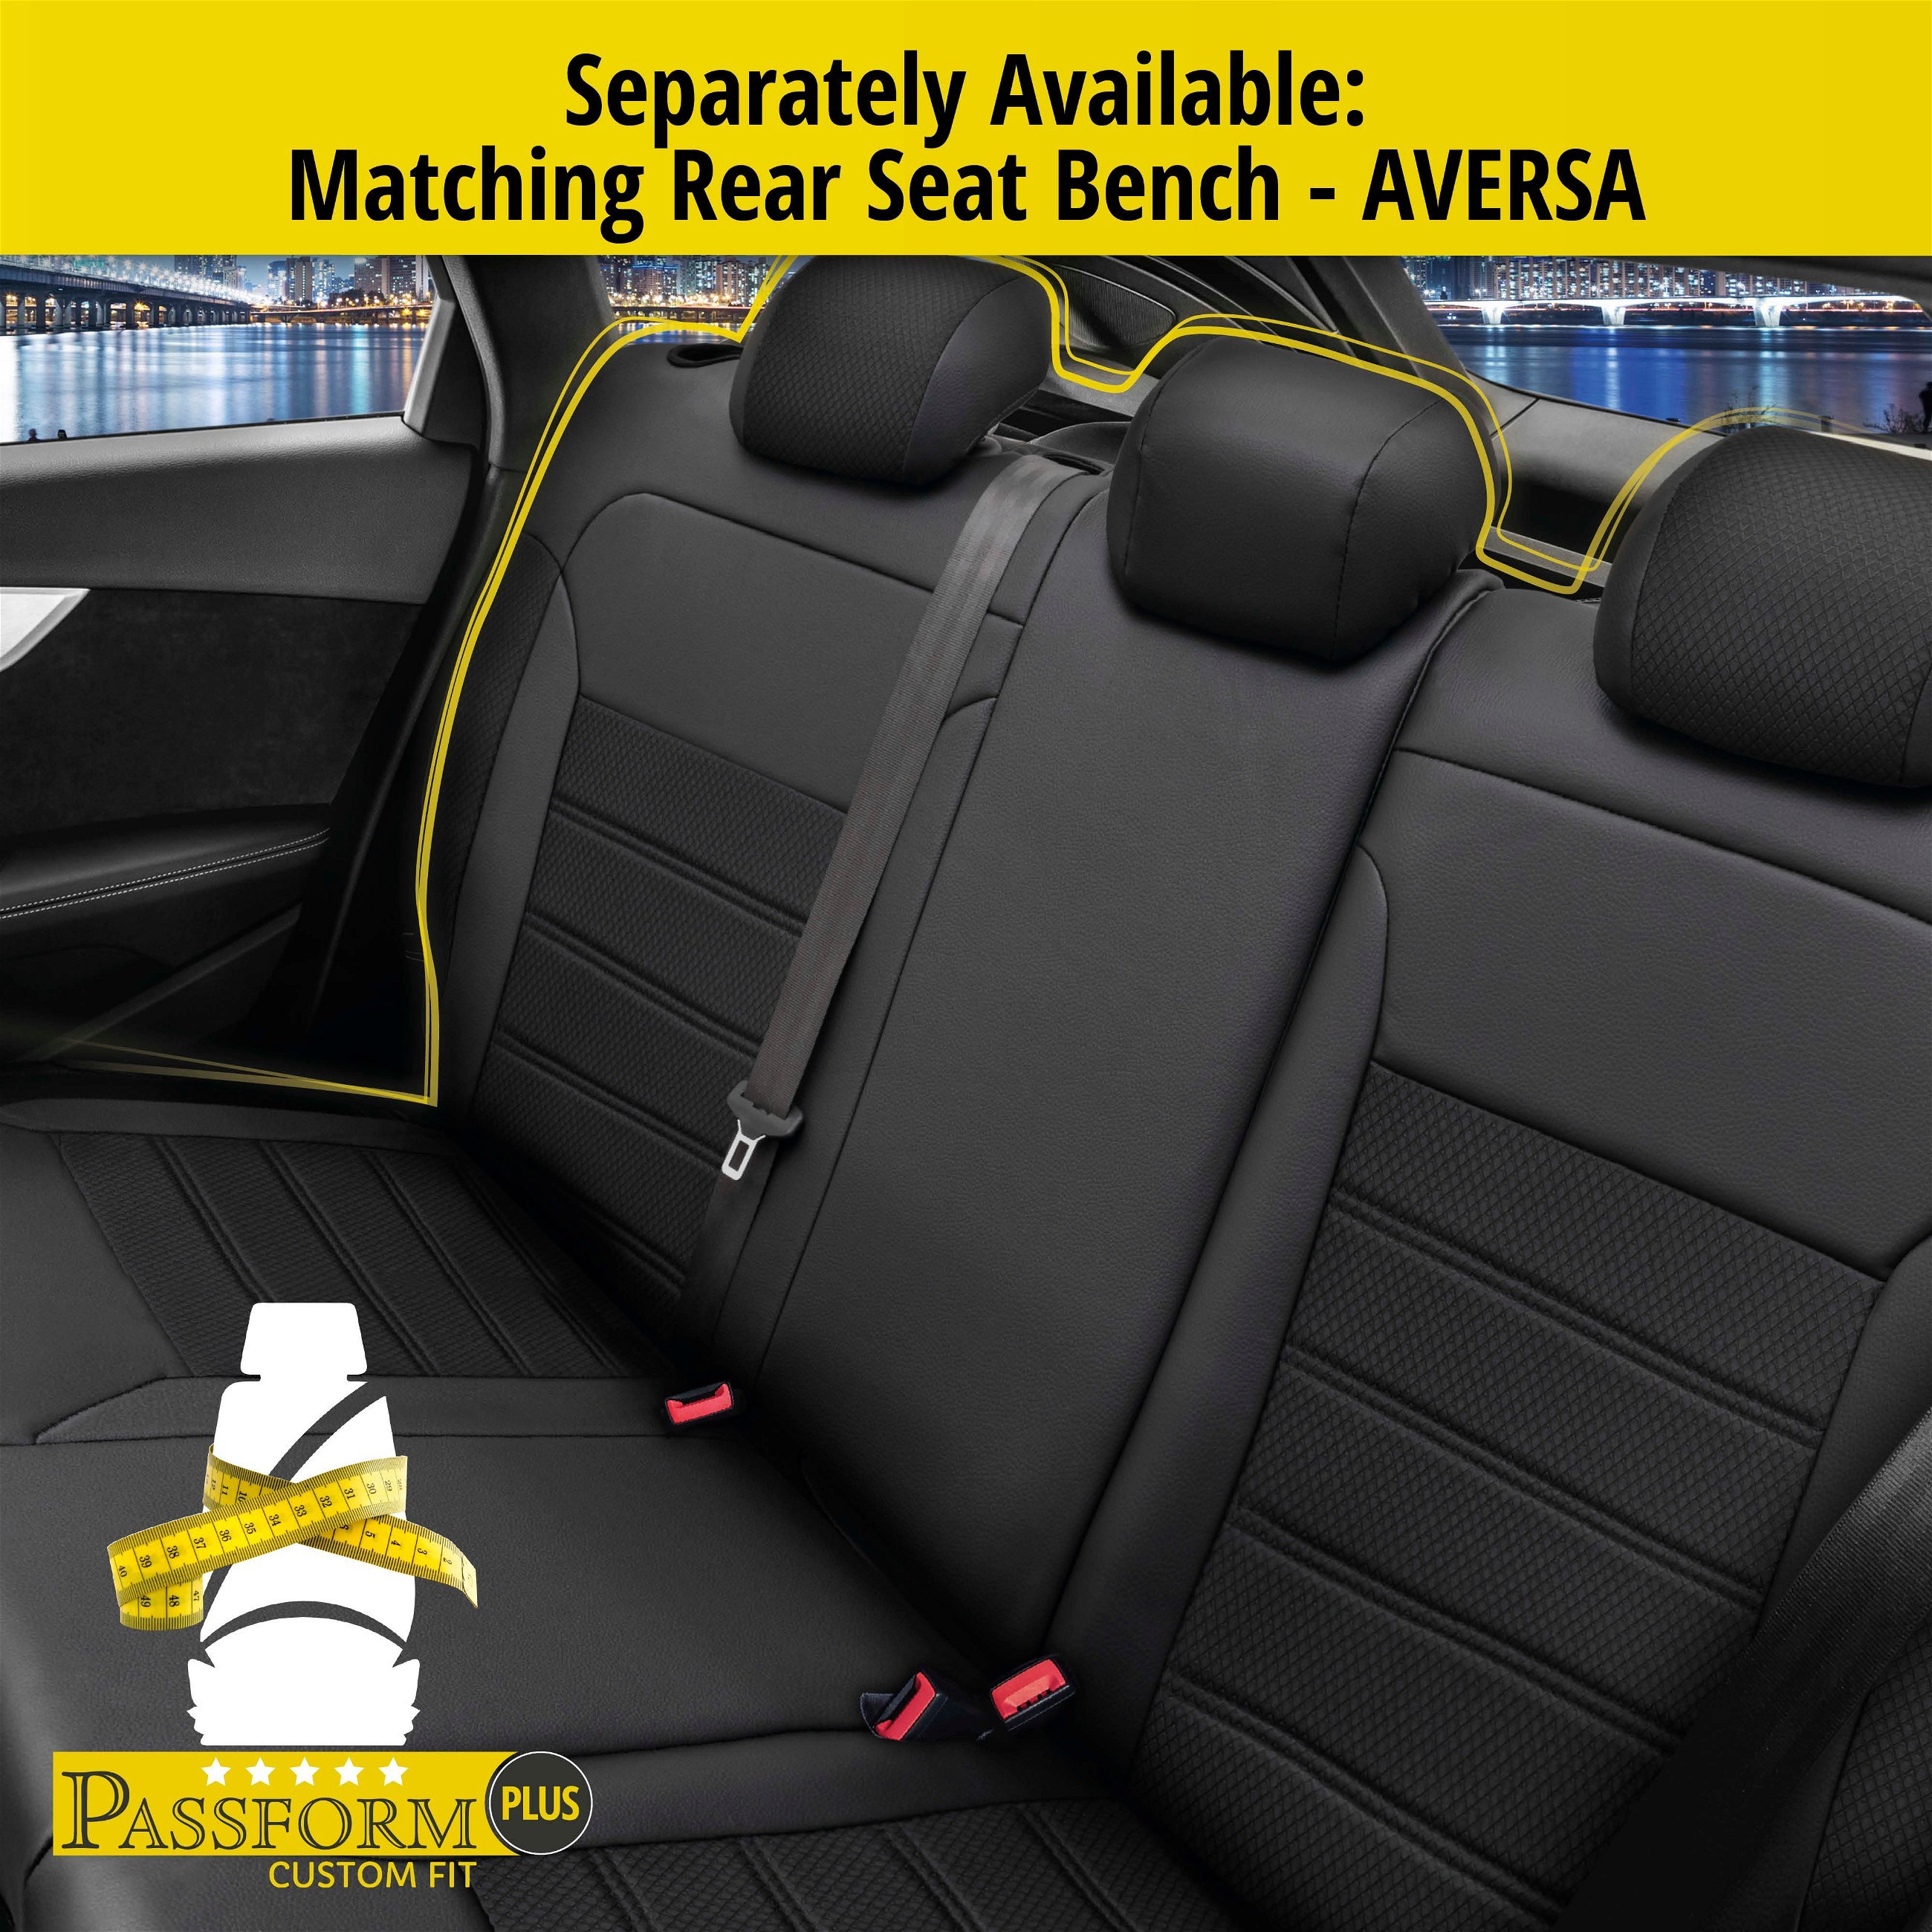 Seat Cover Aversa for VW Passat Variant (3G5, CB5) 08/2014-Today, 2 seat covers for normal seats